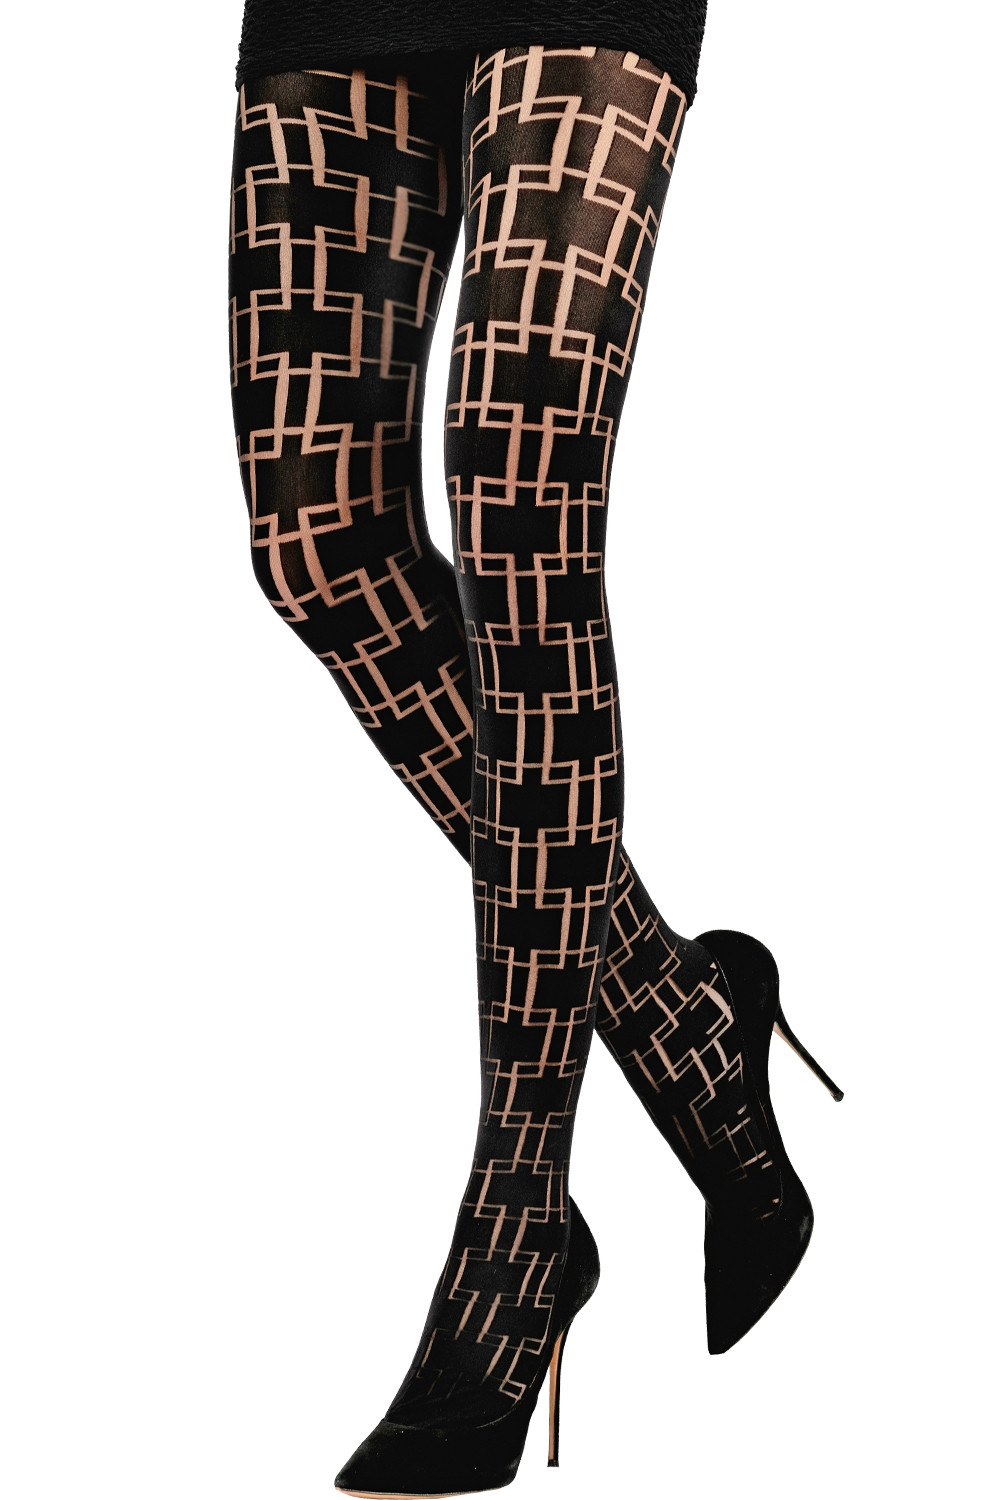 Fendi Patterned tights, Women's Clothing